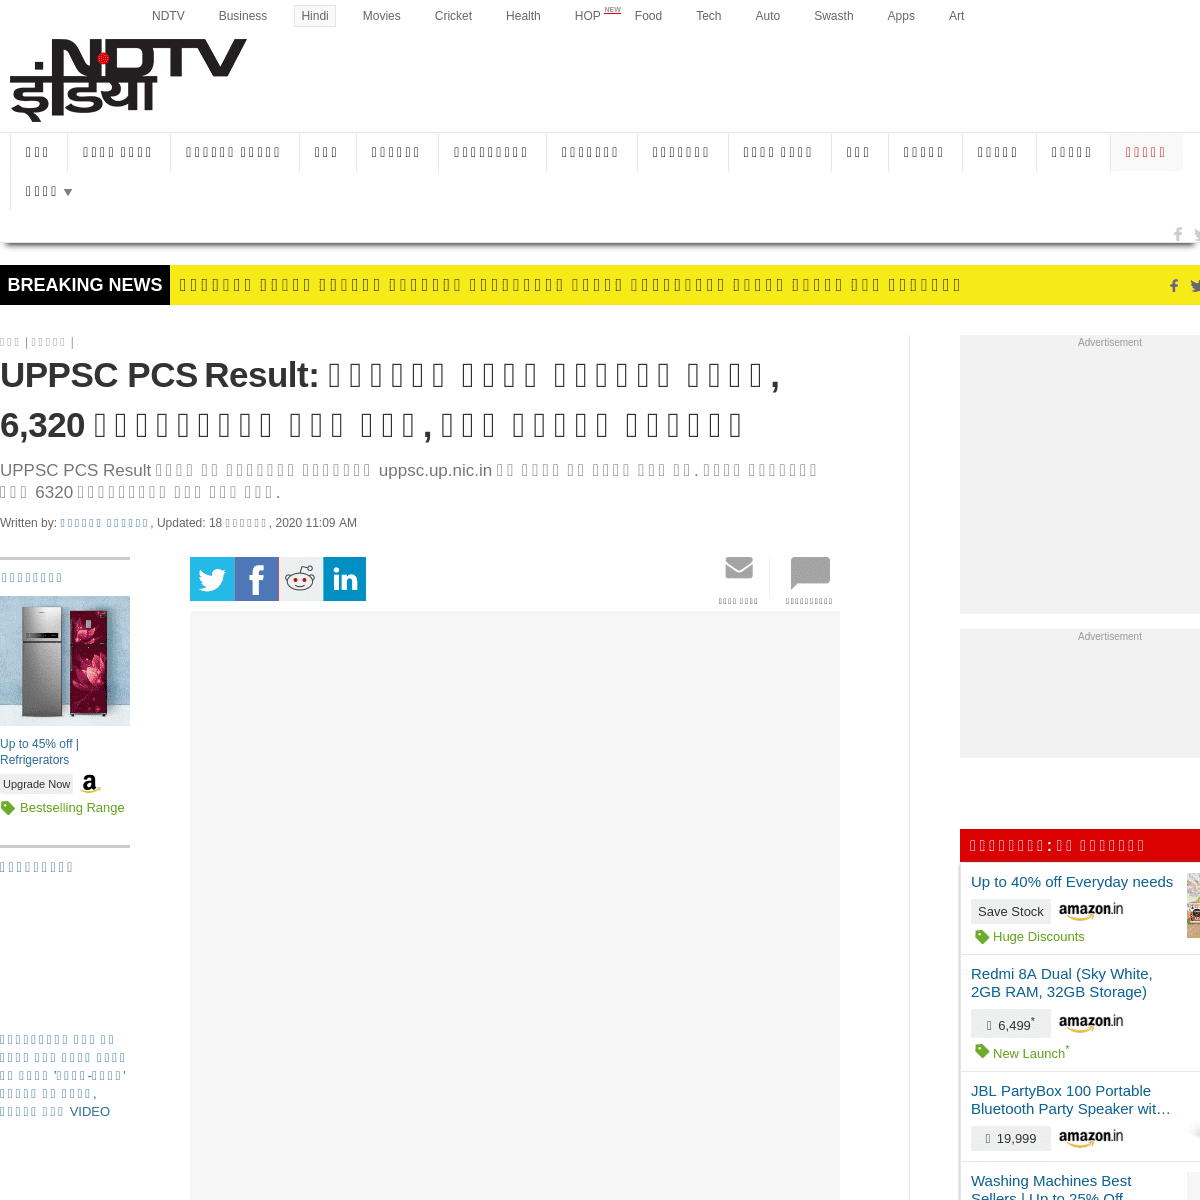 A complete backup of khabar.ndtv.com/news/career/uppsc-pcs-prelims-exam-result-2019-declared-at-uppsc-up-nic-in-2181748